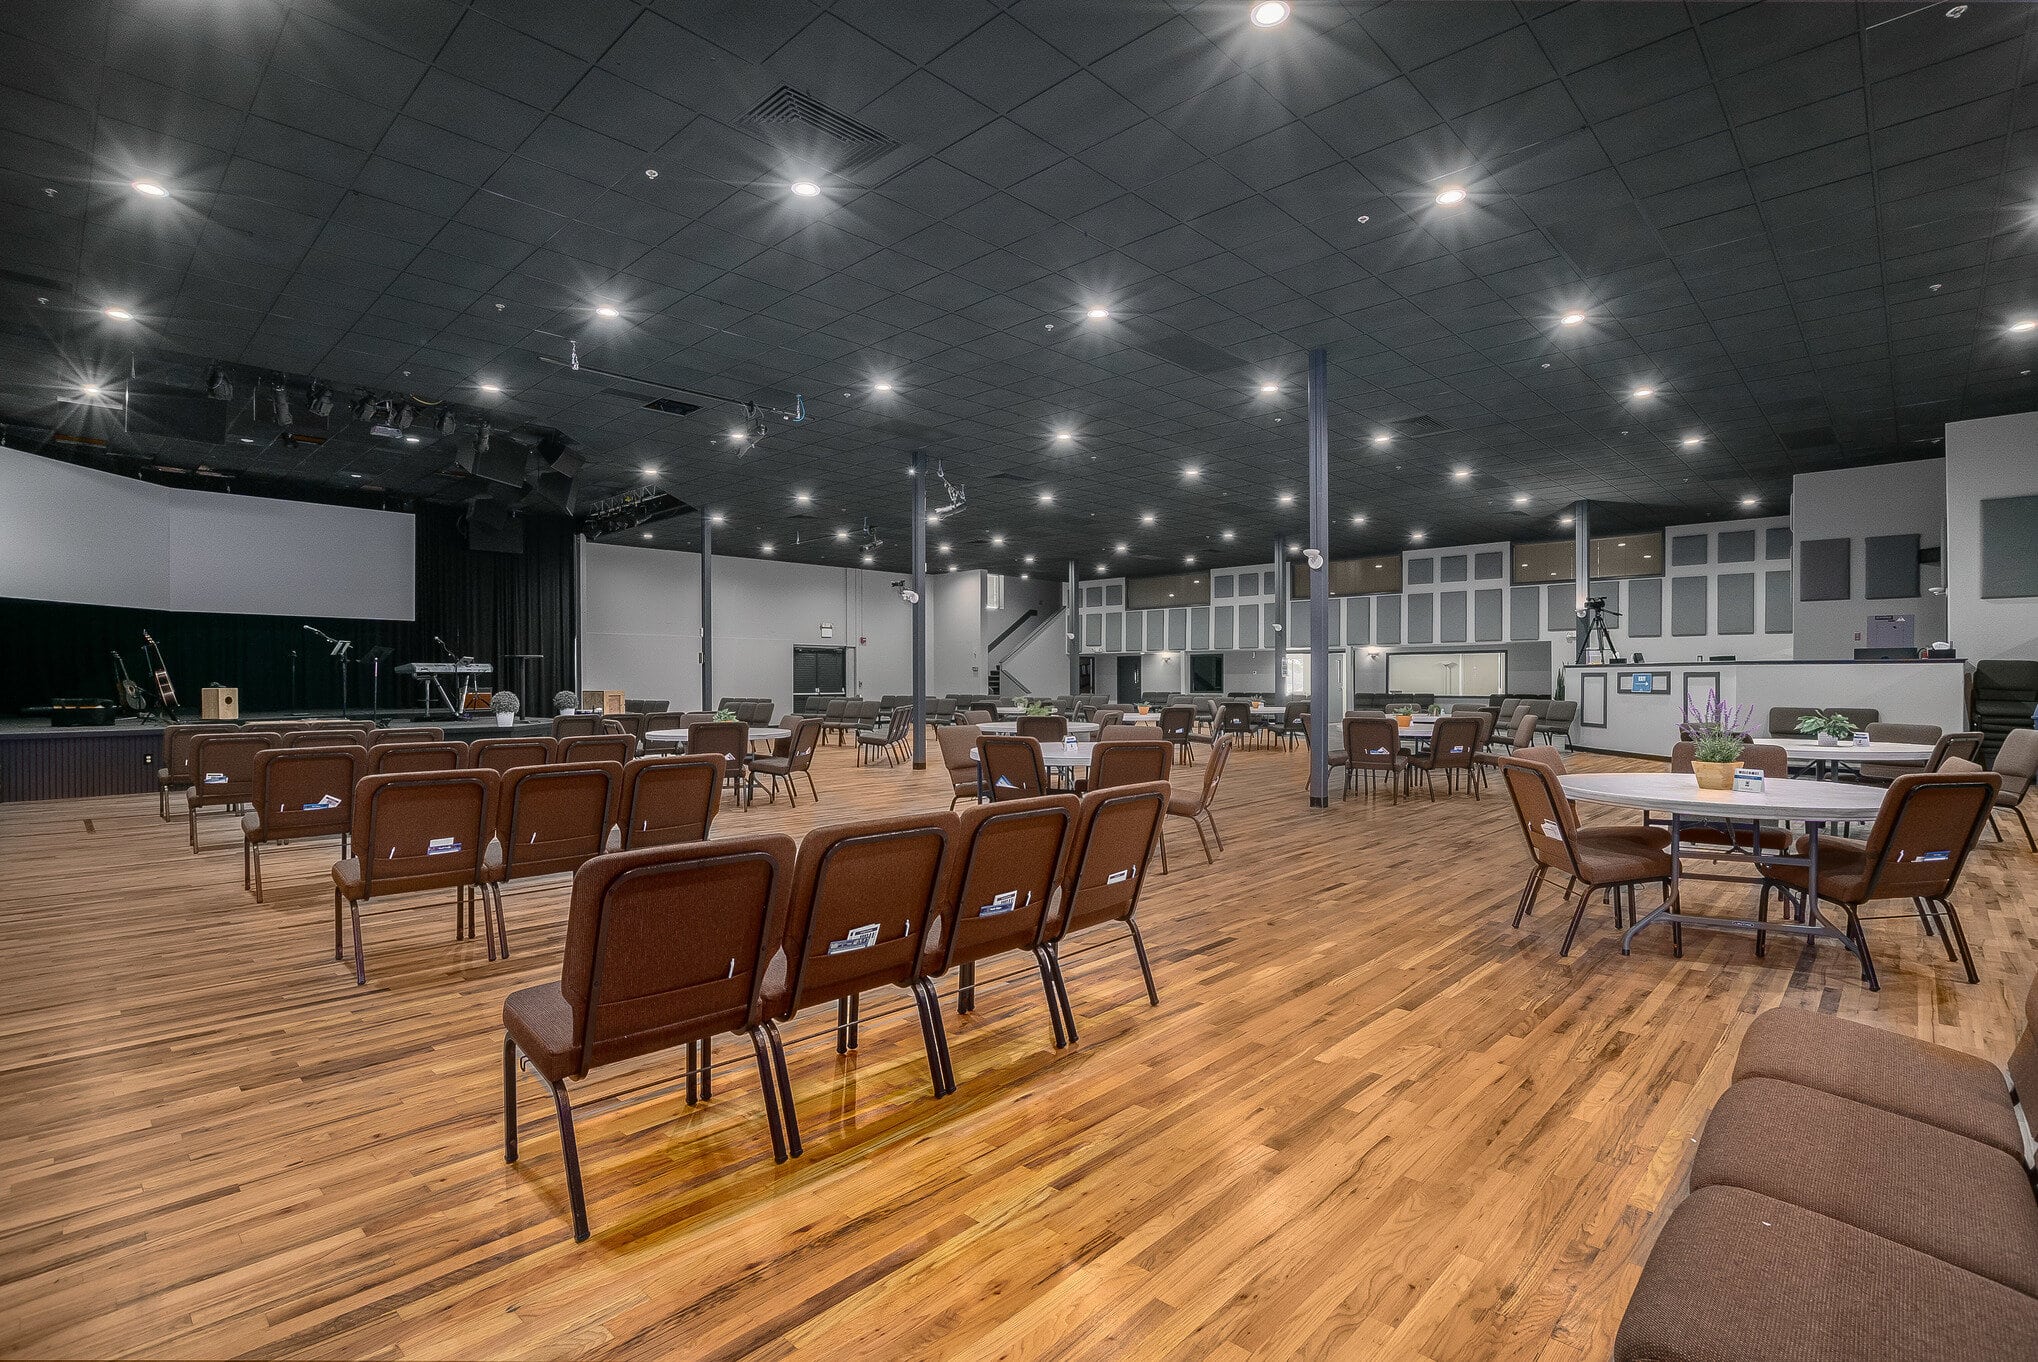 Large banquet hall with brown leather chairs and white round tables